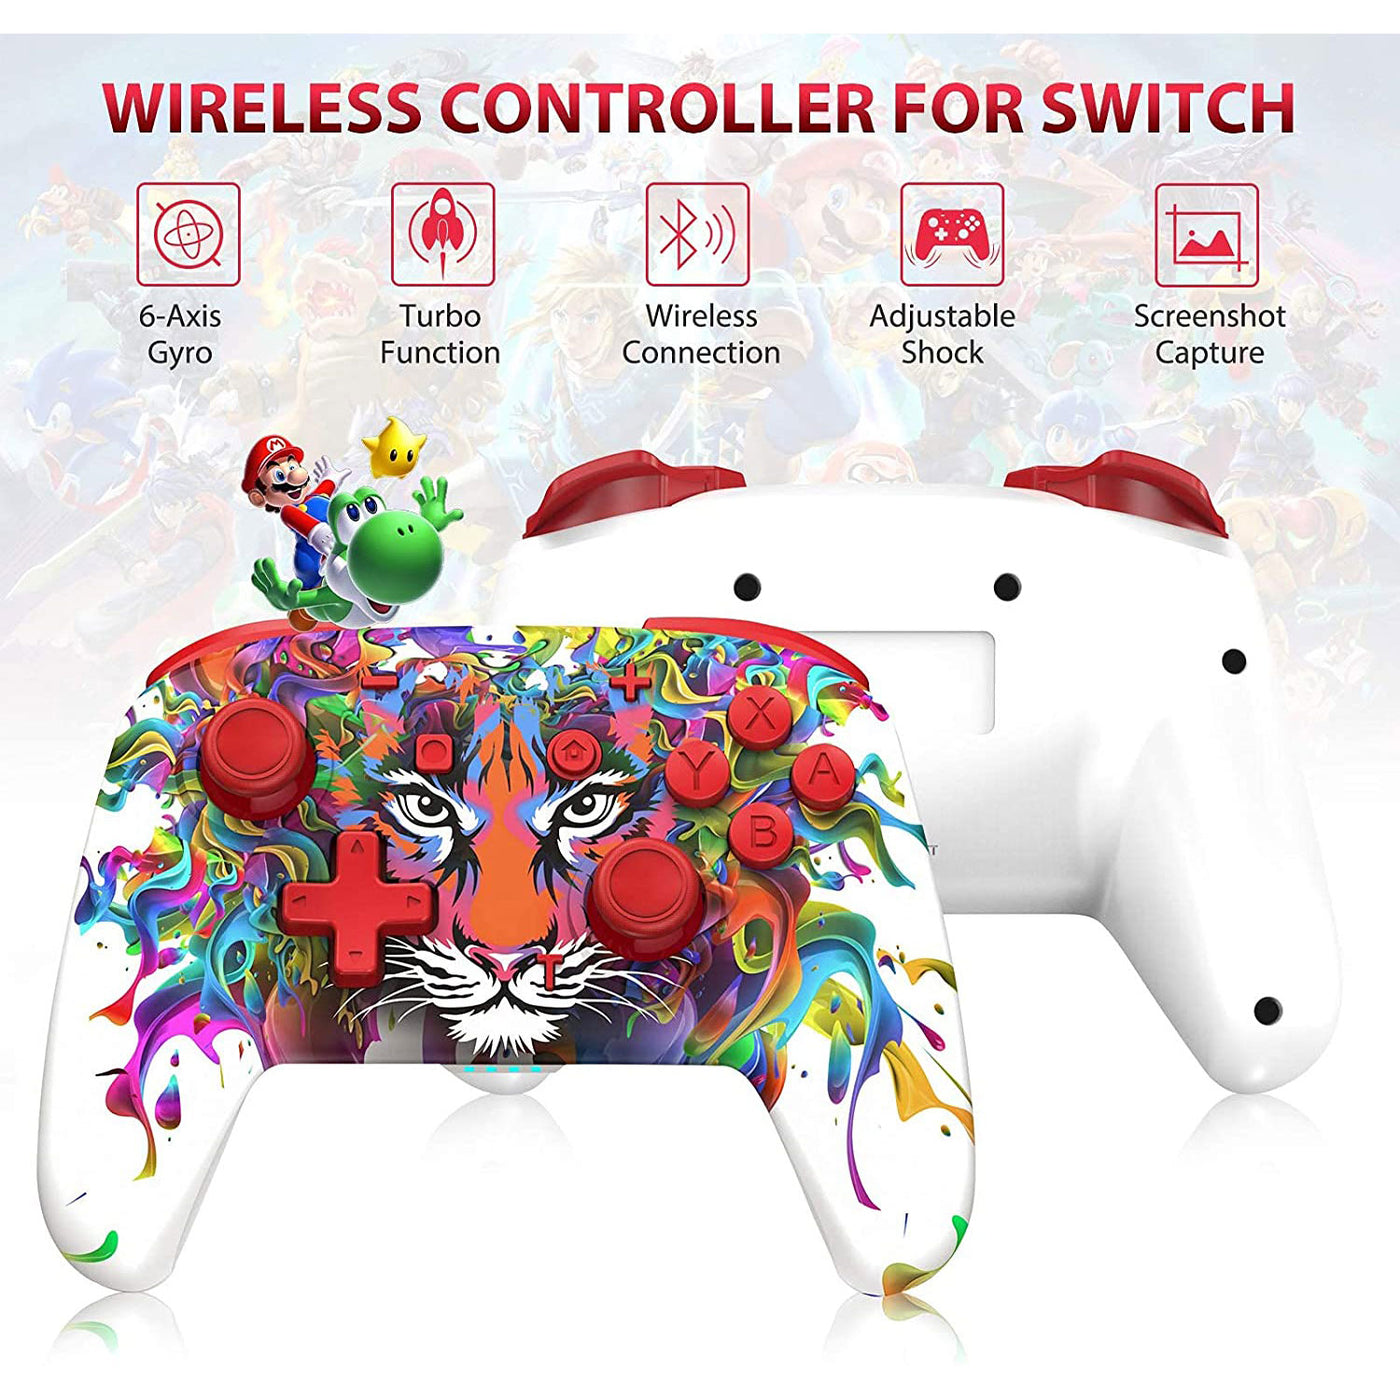 LANGTU Store EasySMX Switch Wireless Pro Controller/Remote/Gamepad for Switch/Switch Lite with Joysticks, Turbo, Motion Control, Dual Vibration, Wakeup and Screenshot Functions ft. Tiger